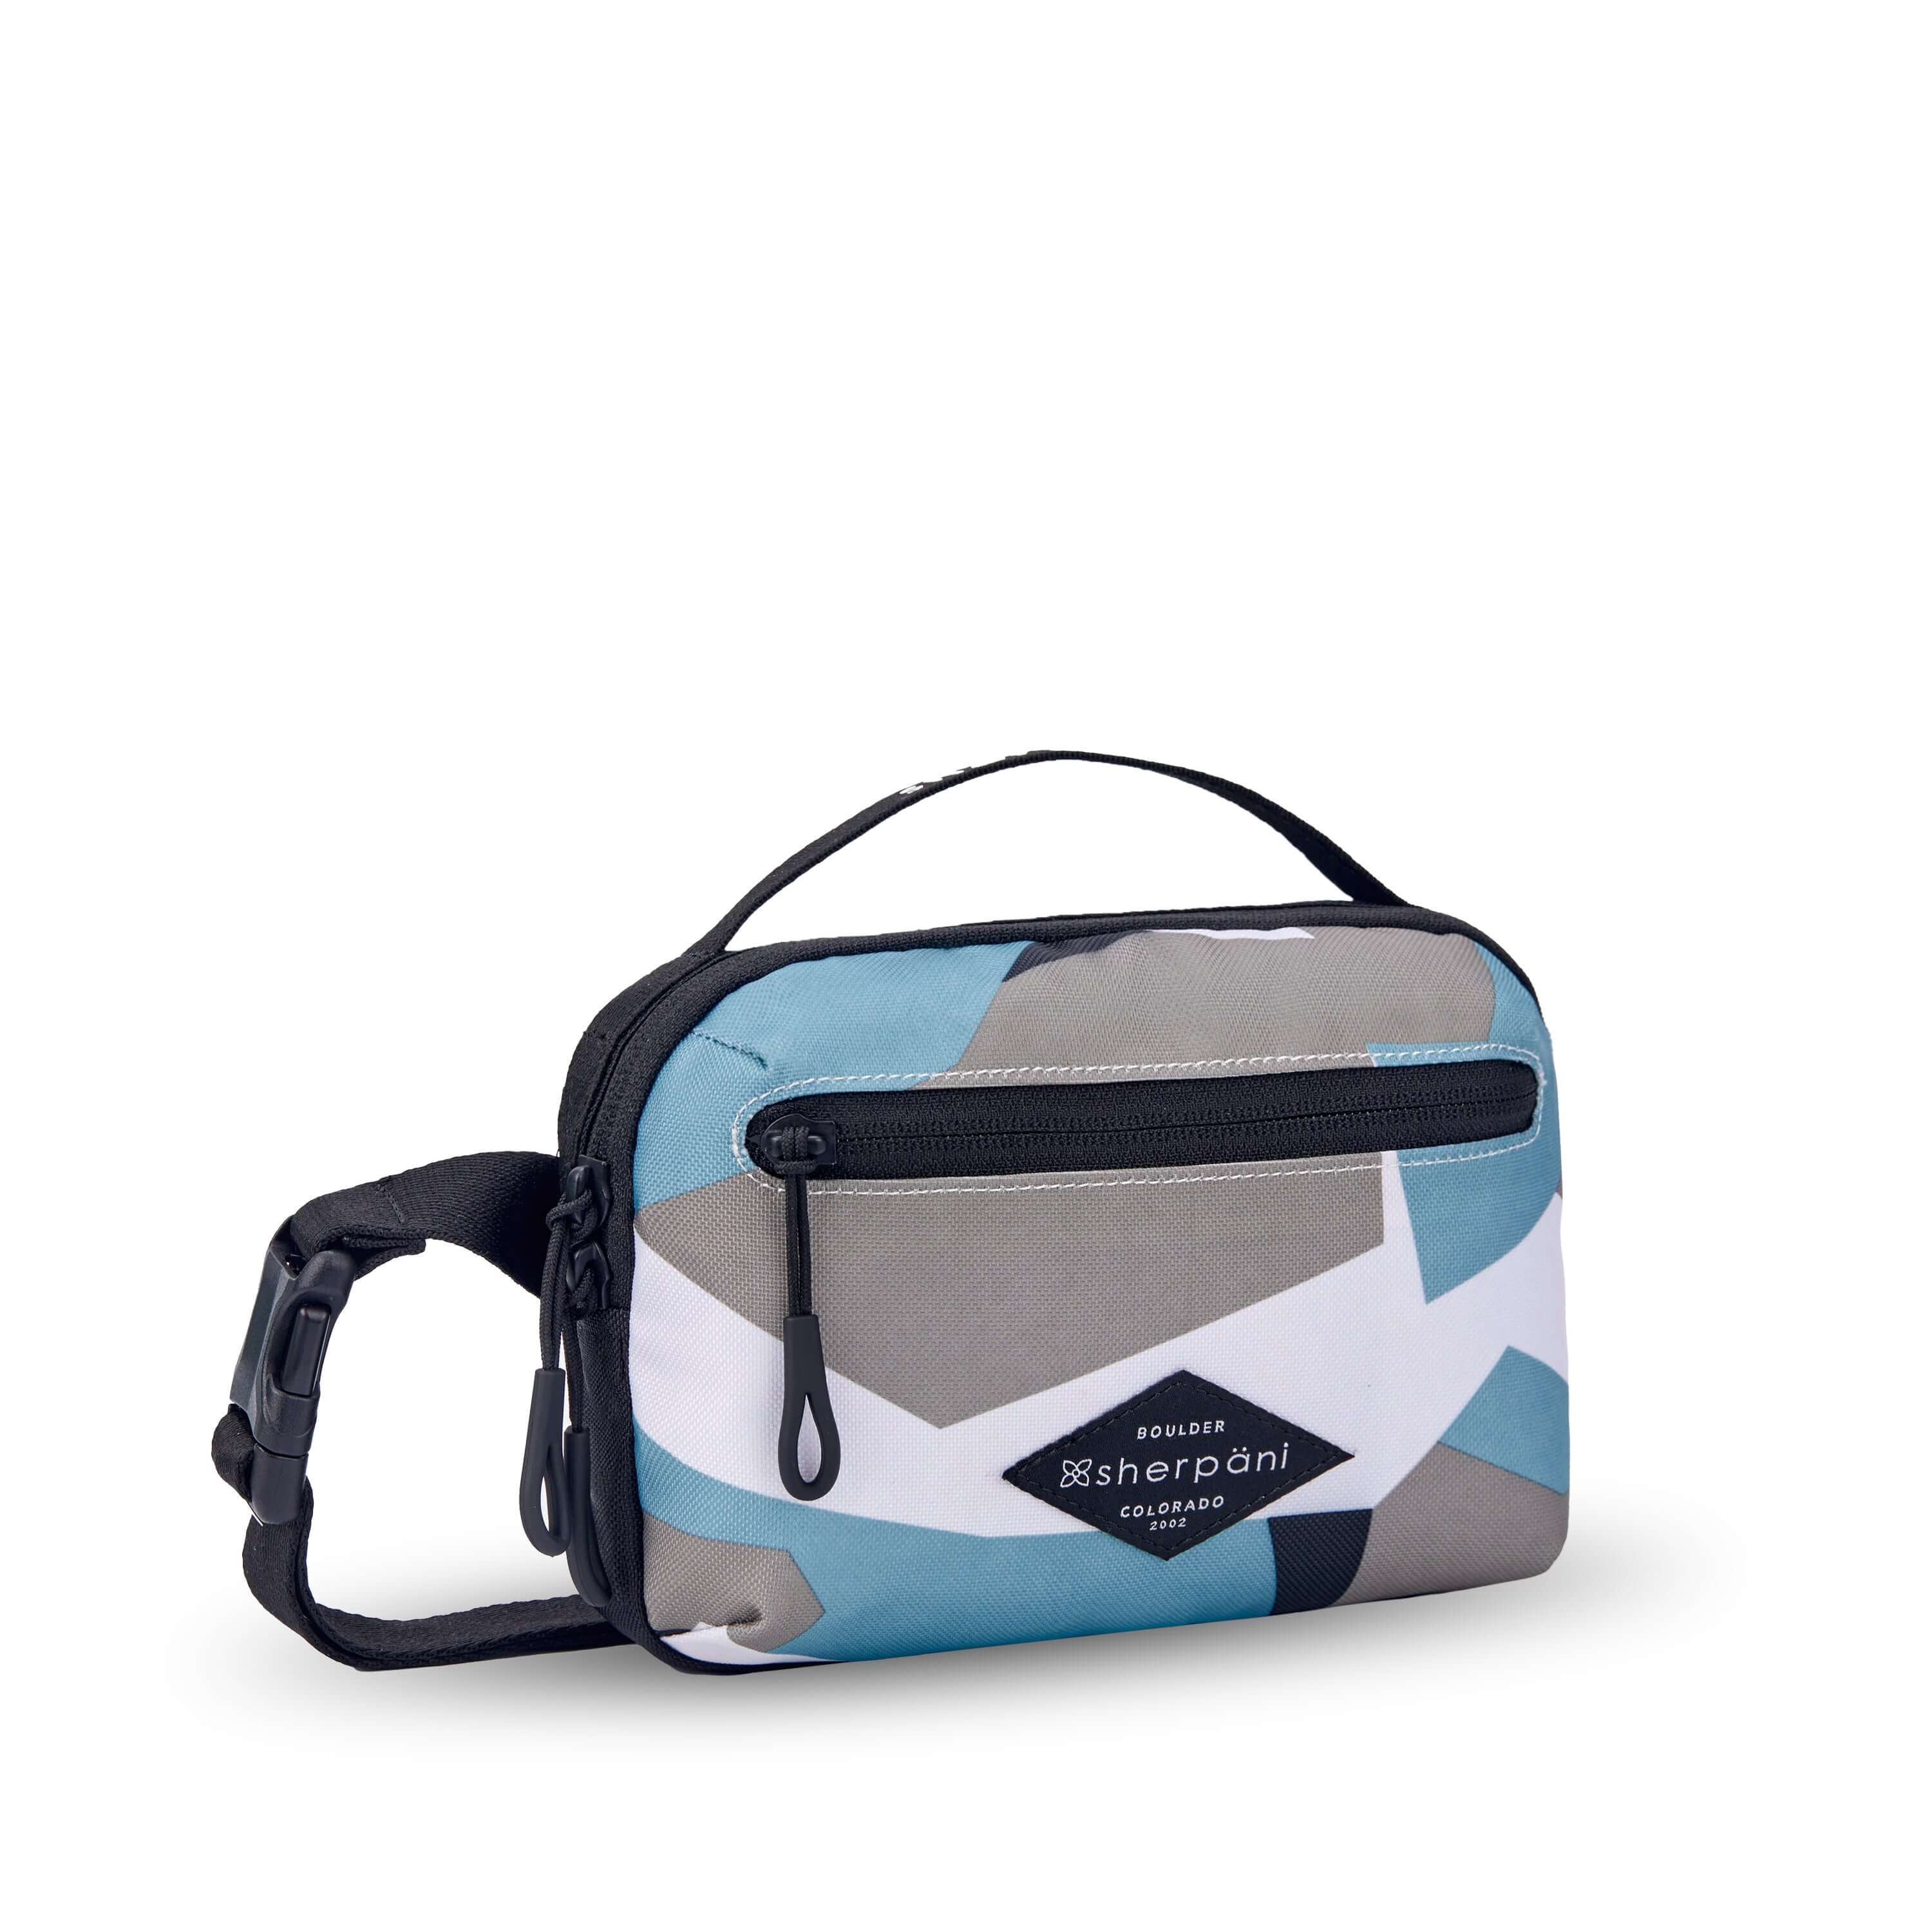 Angled front view of Sherpani’s fanny pack, the Hyk in Summe Camo. The bag is two toned, the front half is a camouflage pattern of light blue, white and gray, and the back half is black. There is an external zipper pocket on the front of the bag. Easy pull zippers are accented in black. The fanny pack features an adjustable strap with a buckle. 